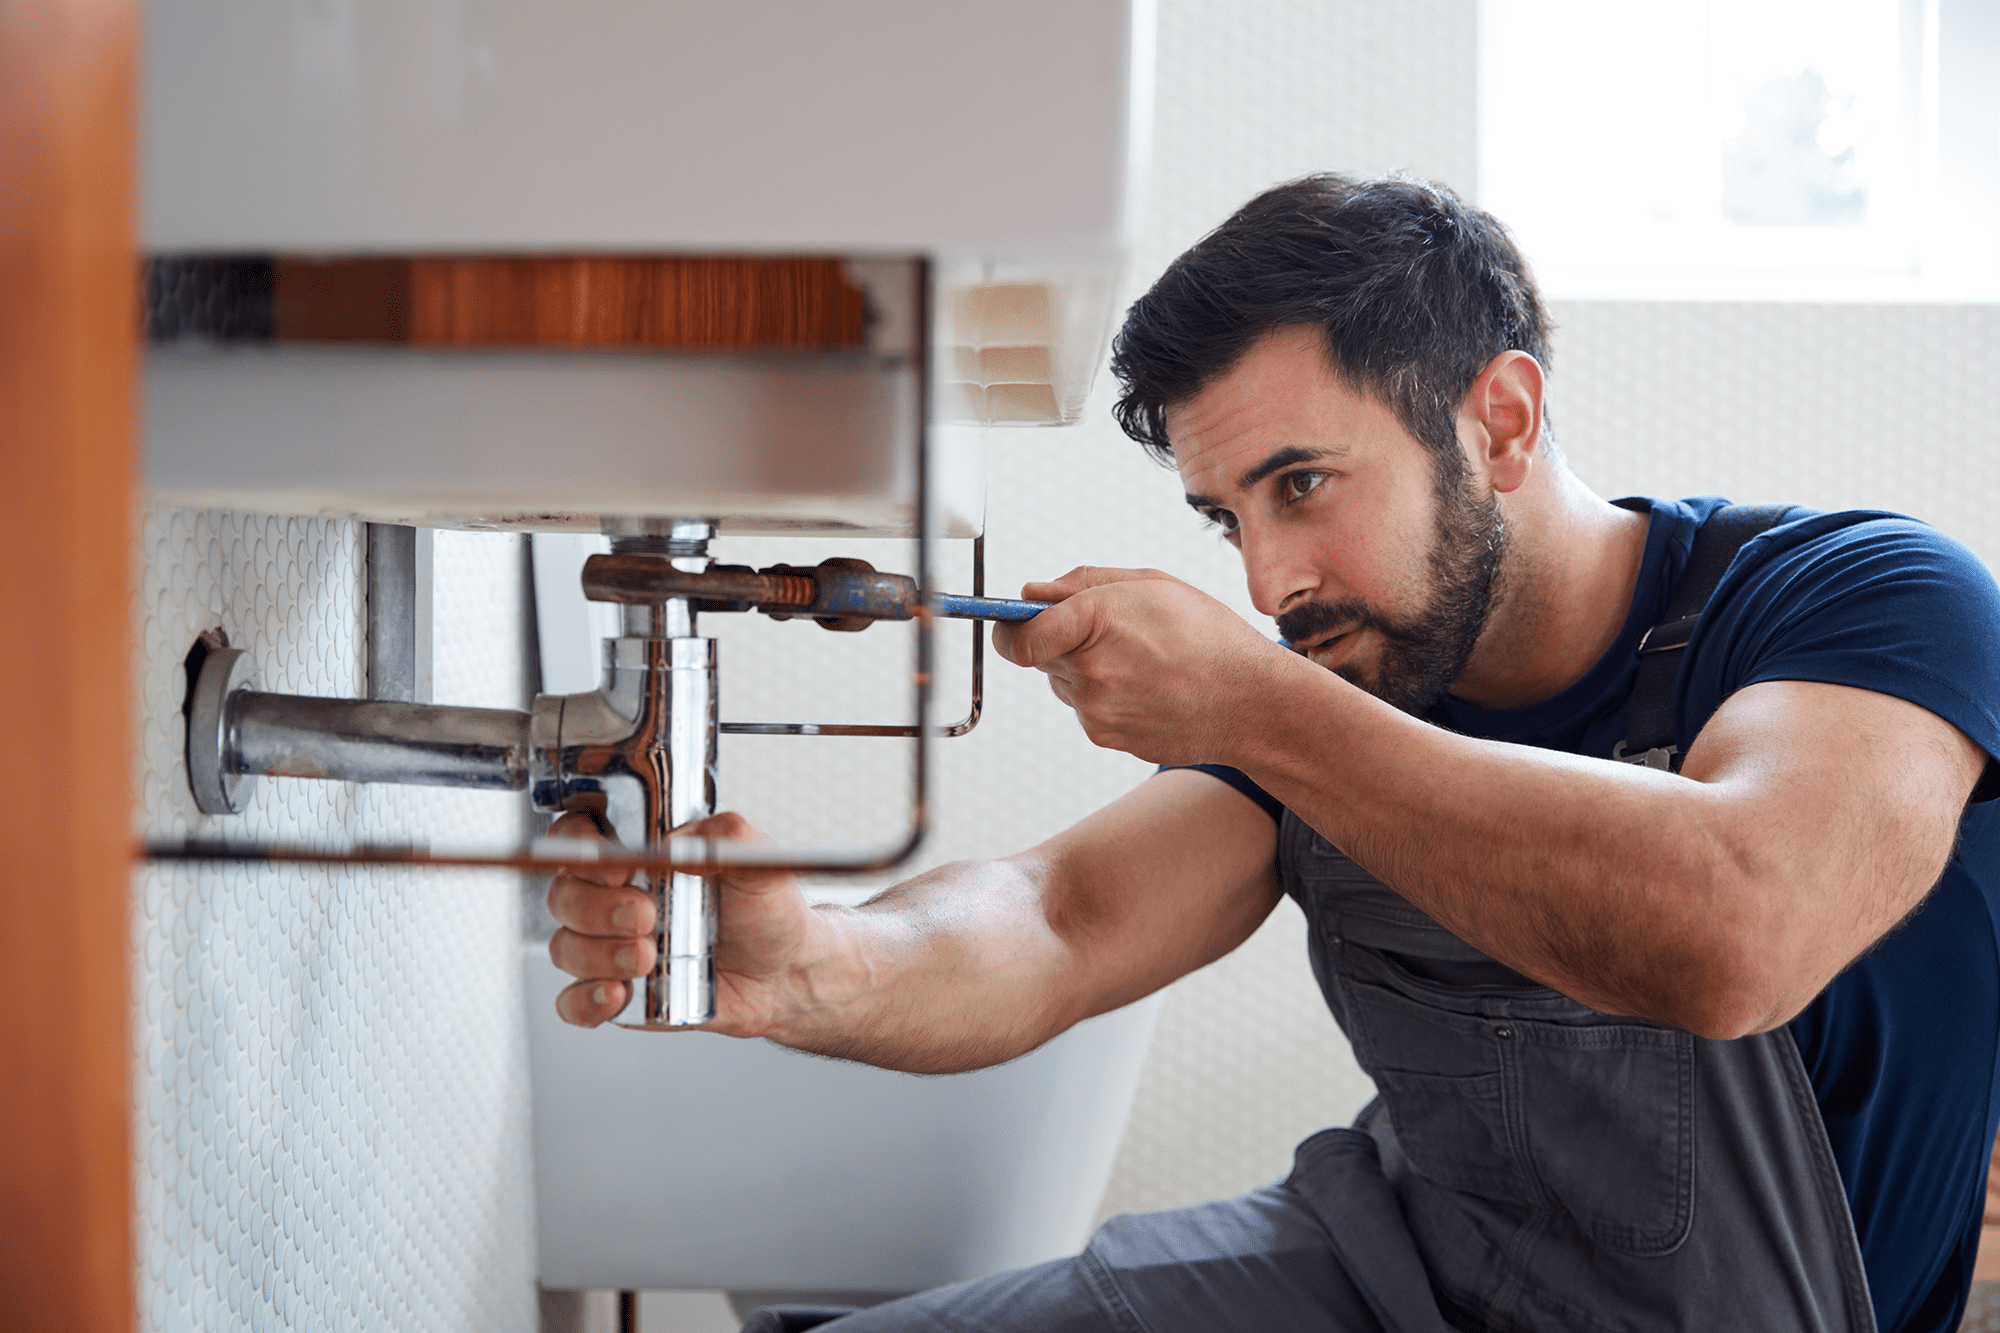 Plumbing service and installation in Kokomo, Indiana and nearby.